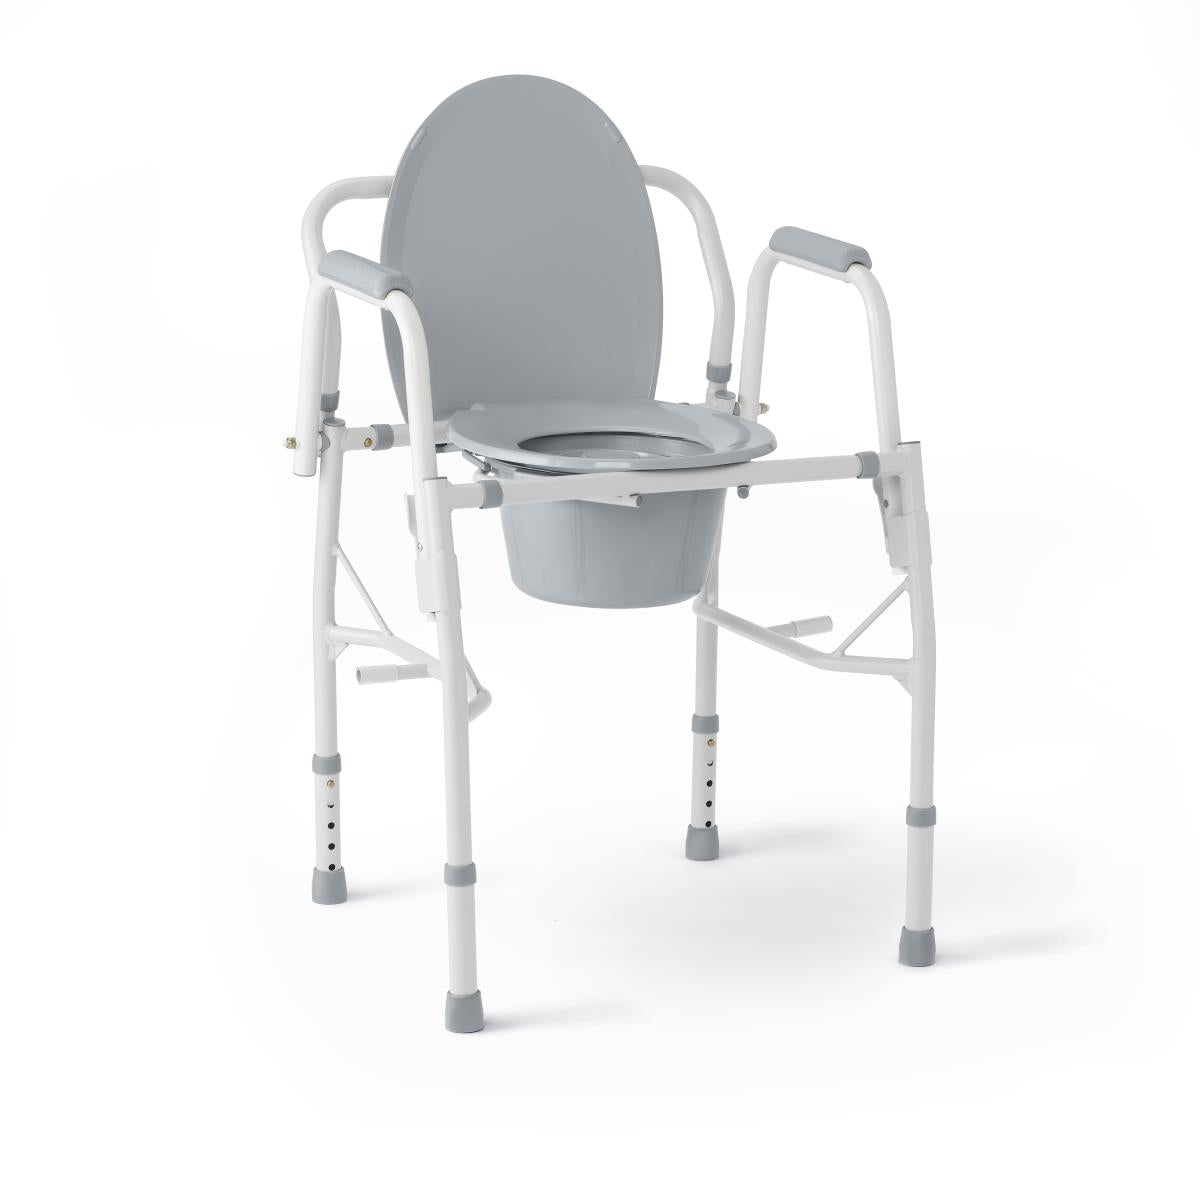 Guardian Steel Drop-Arm Commode (G1-301DX1)